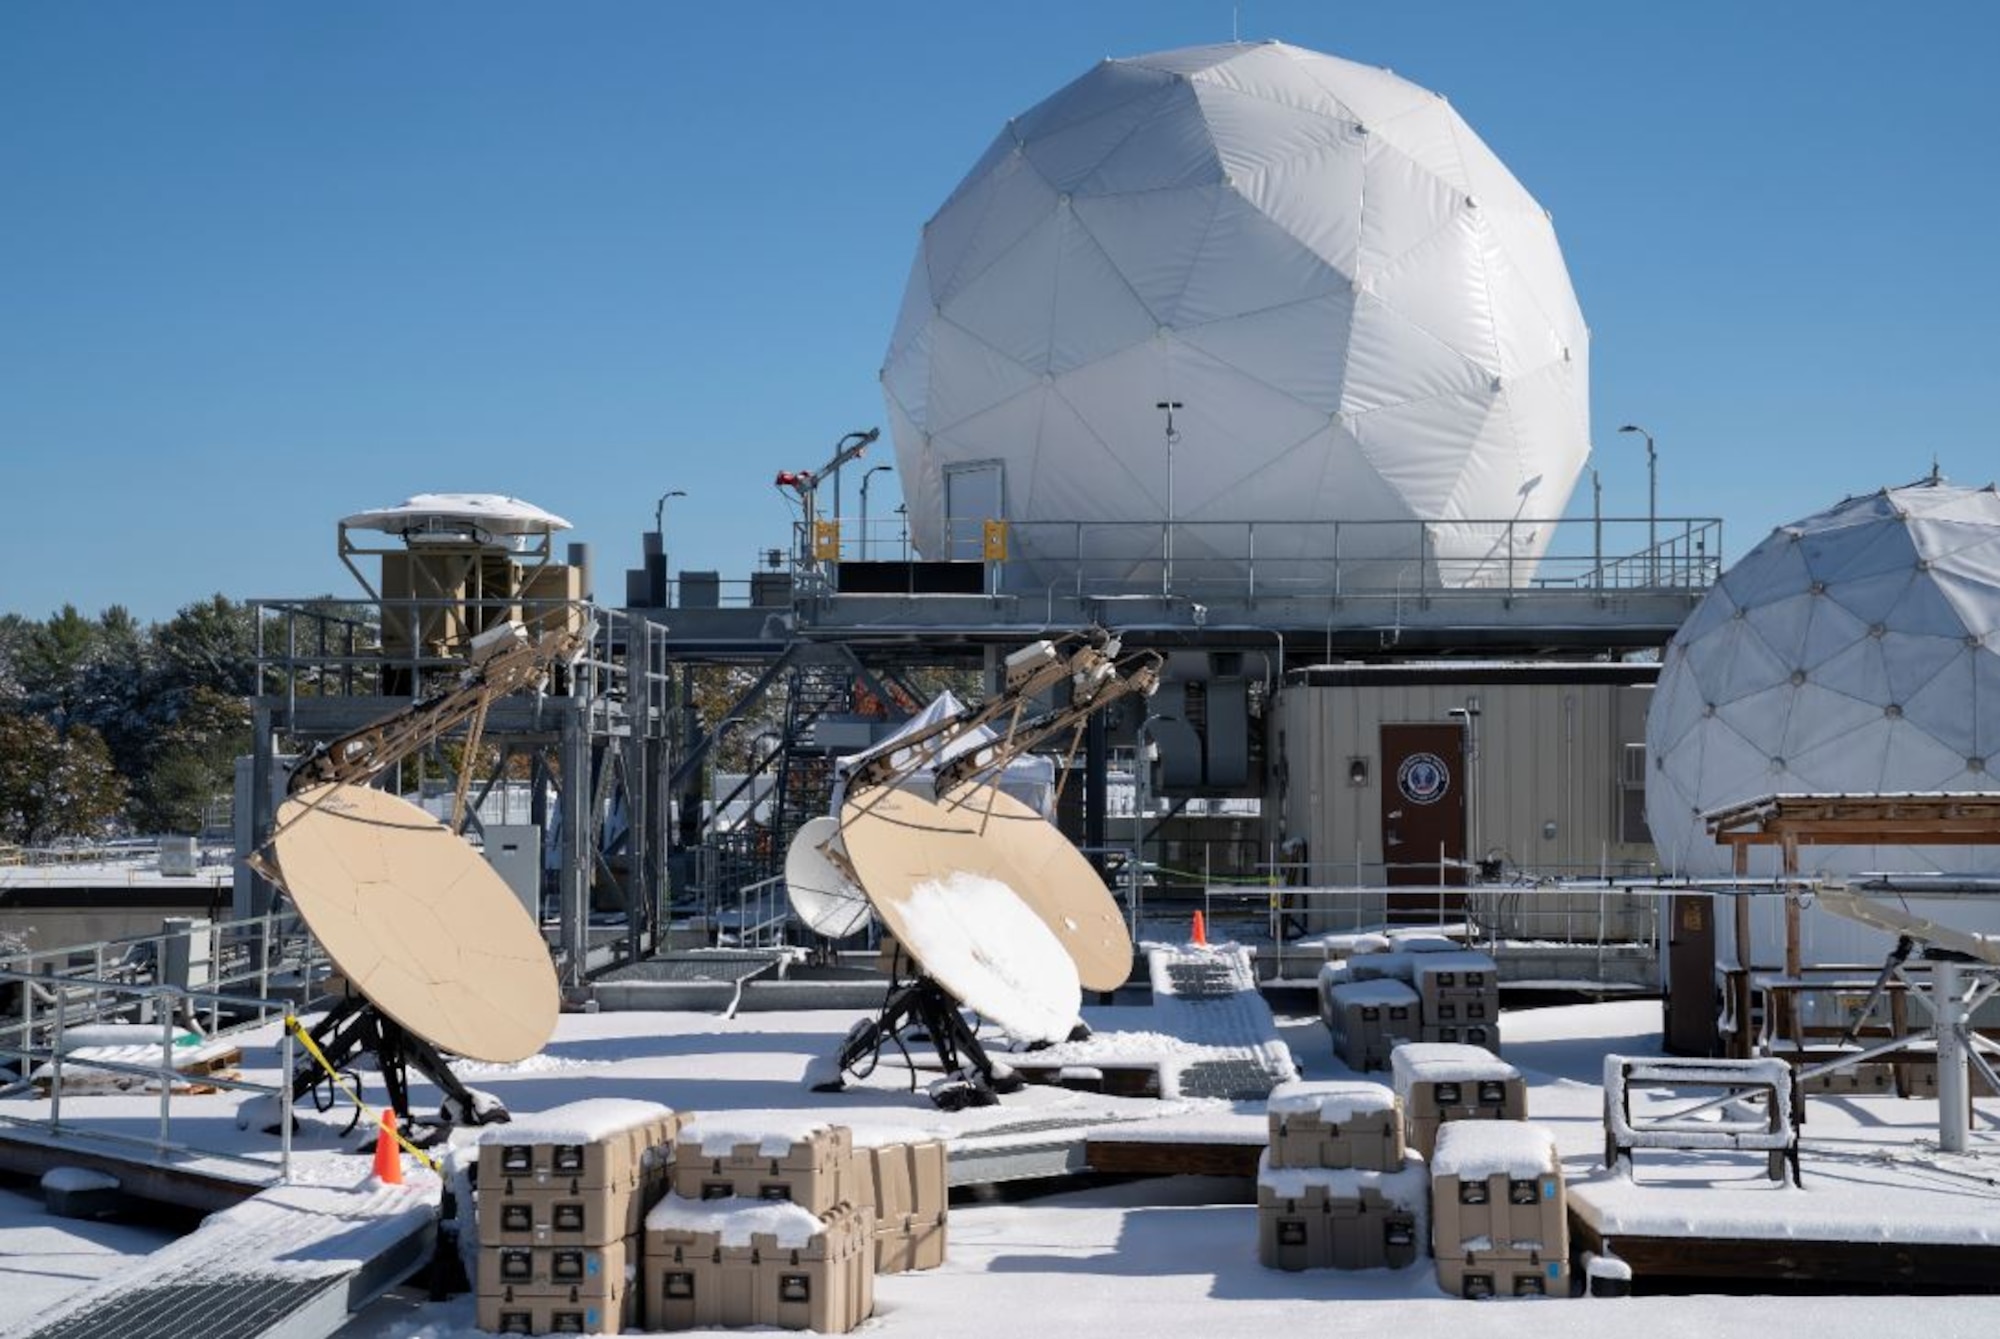 AvL MEO tracking antennas, provided by SES are shown operating at MIT Lincoln Laboratory in support of the PTW O3b test. (Photo courtesy of MIT Lincoln Laboratory)